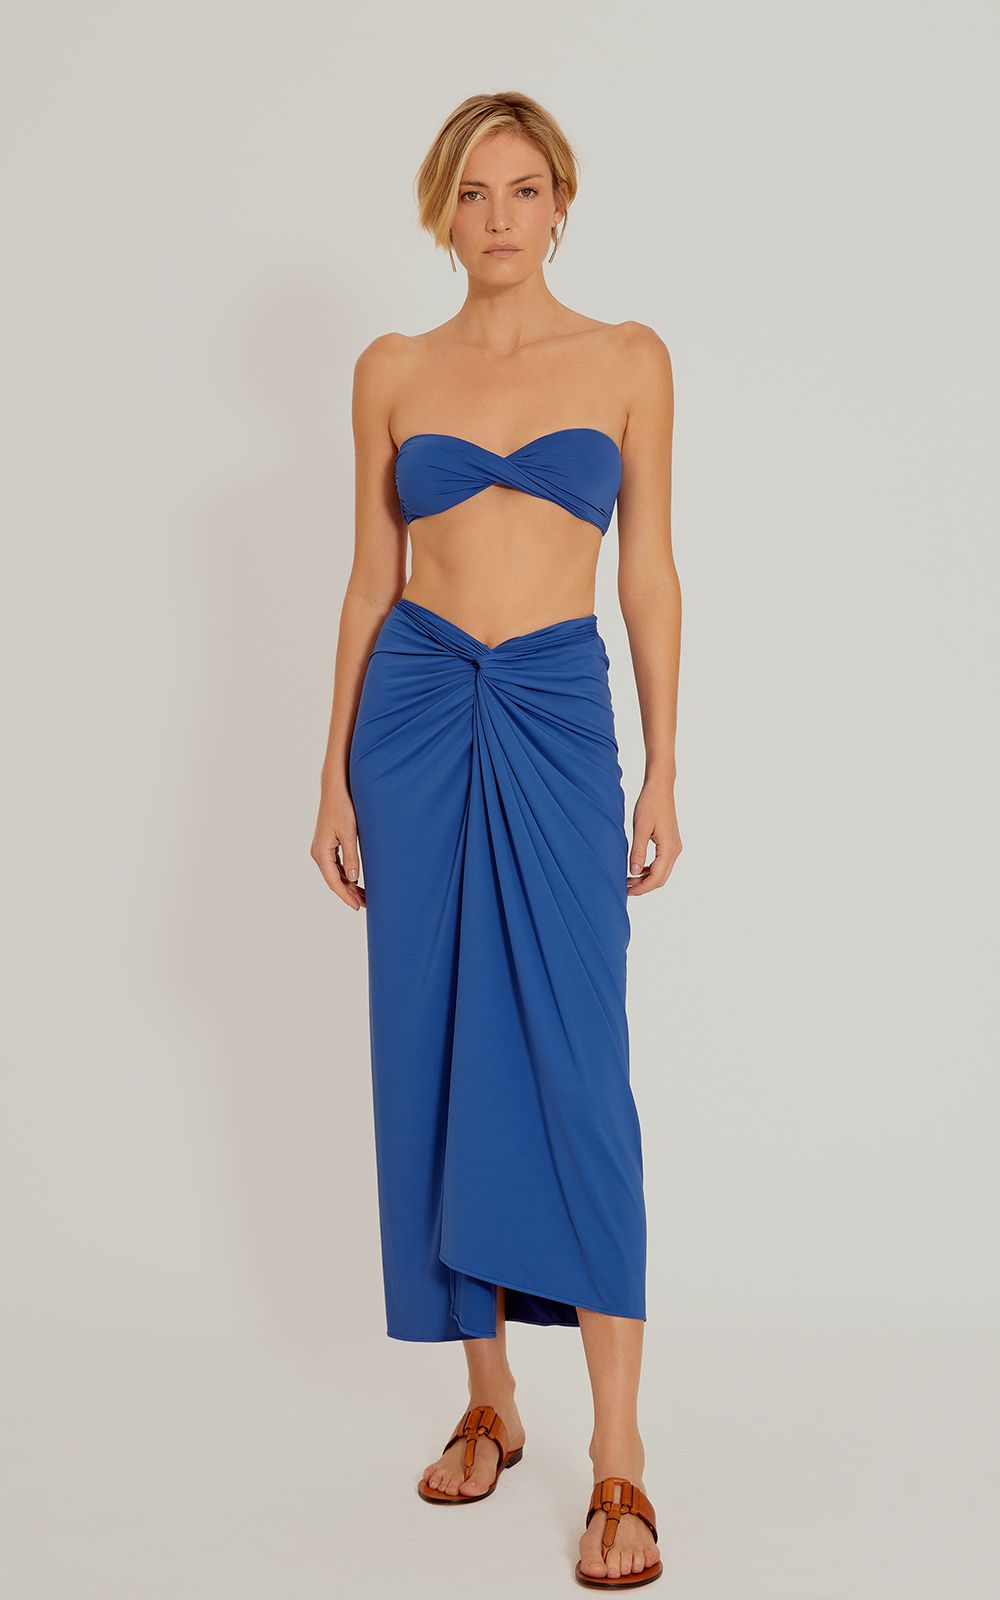 Lenny Niemeyer Knot Touch Sarong in Cobalt -Wear Multiple Ways